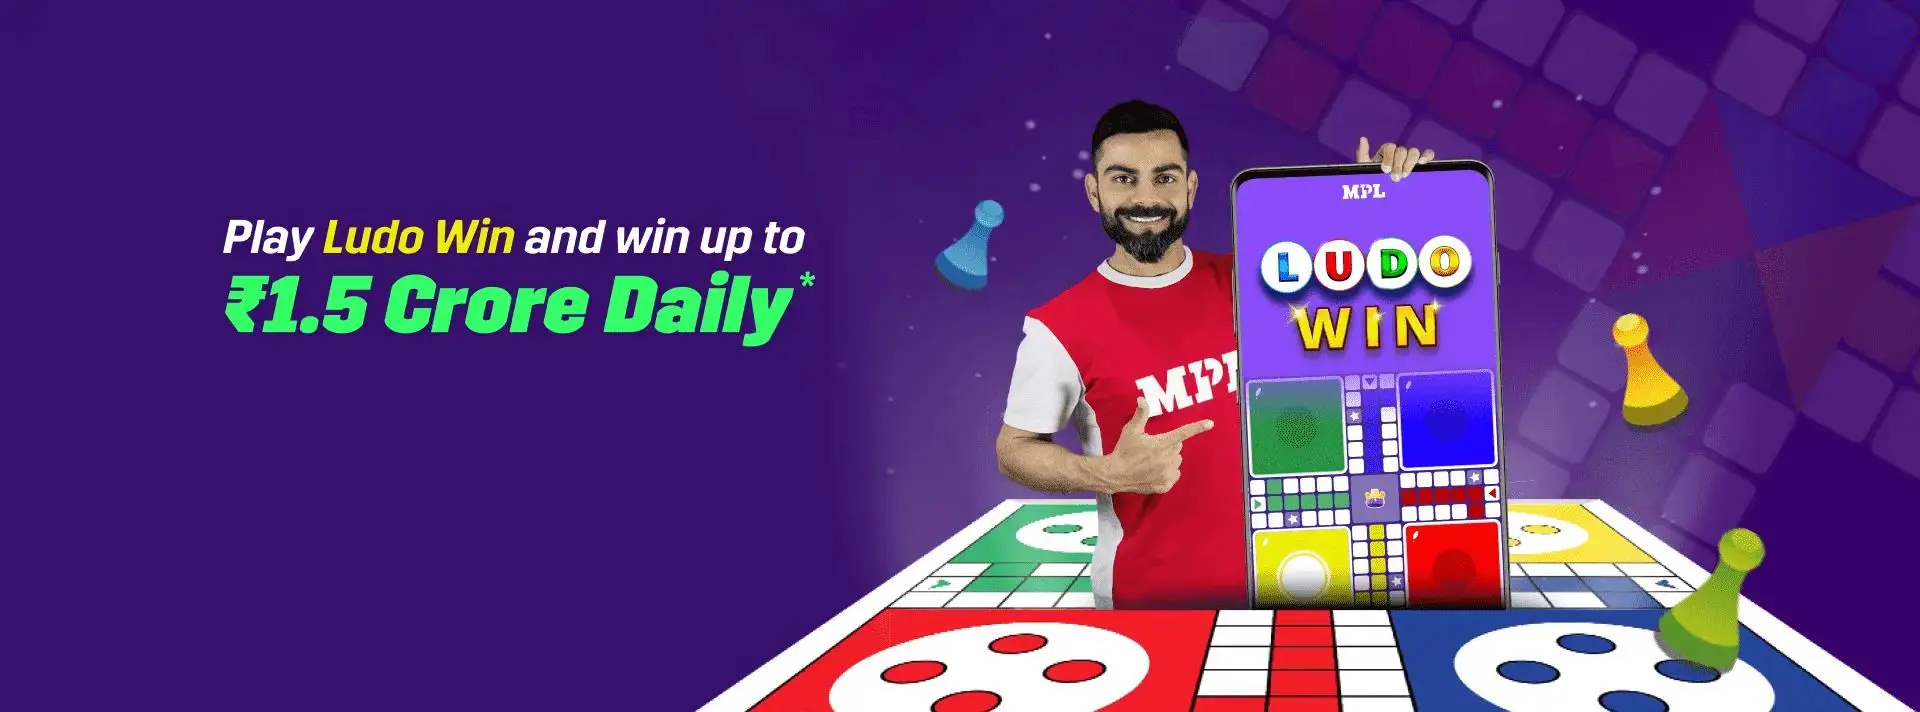 Play Ludo Win online on the MPL app and take away guaranteed prizes!